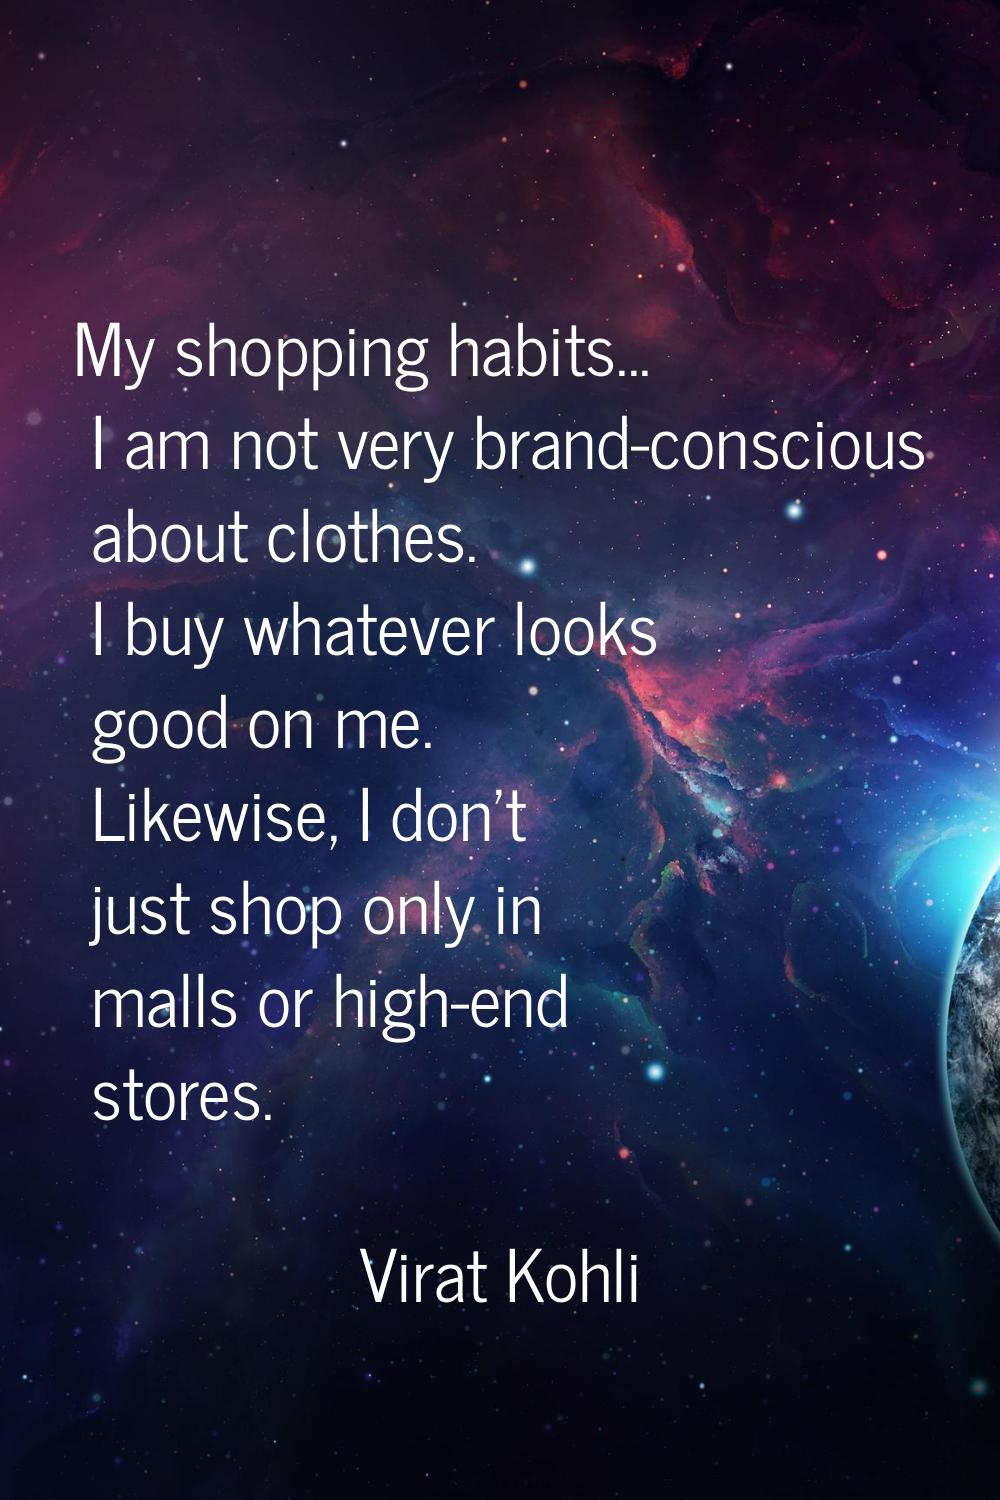 My shopping habits... I am not very brand-conscious about clothes. I buy whatever looks good on me.